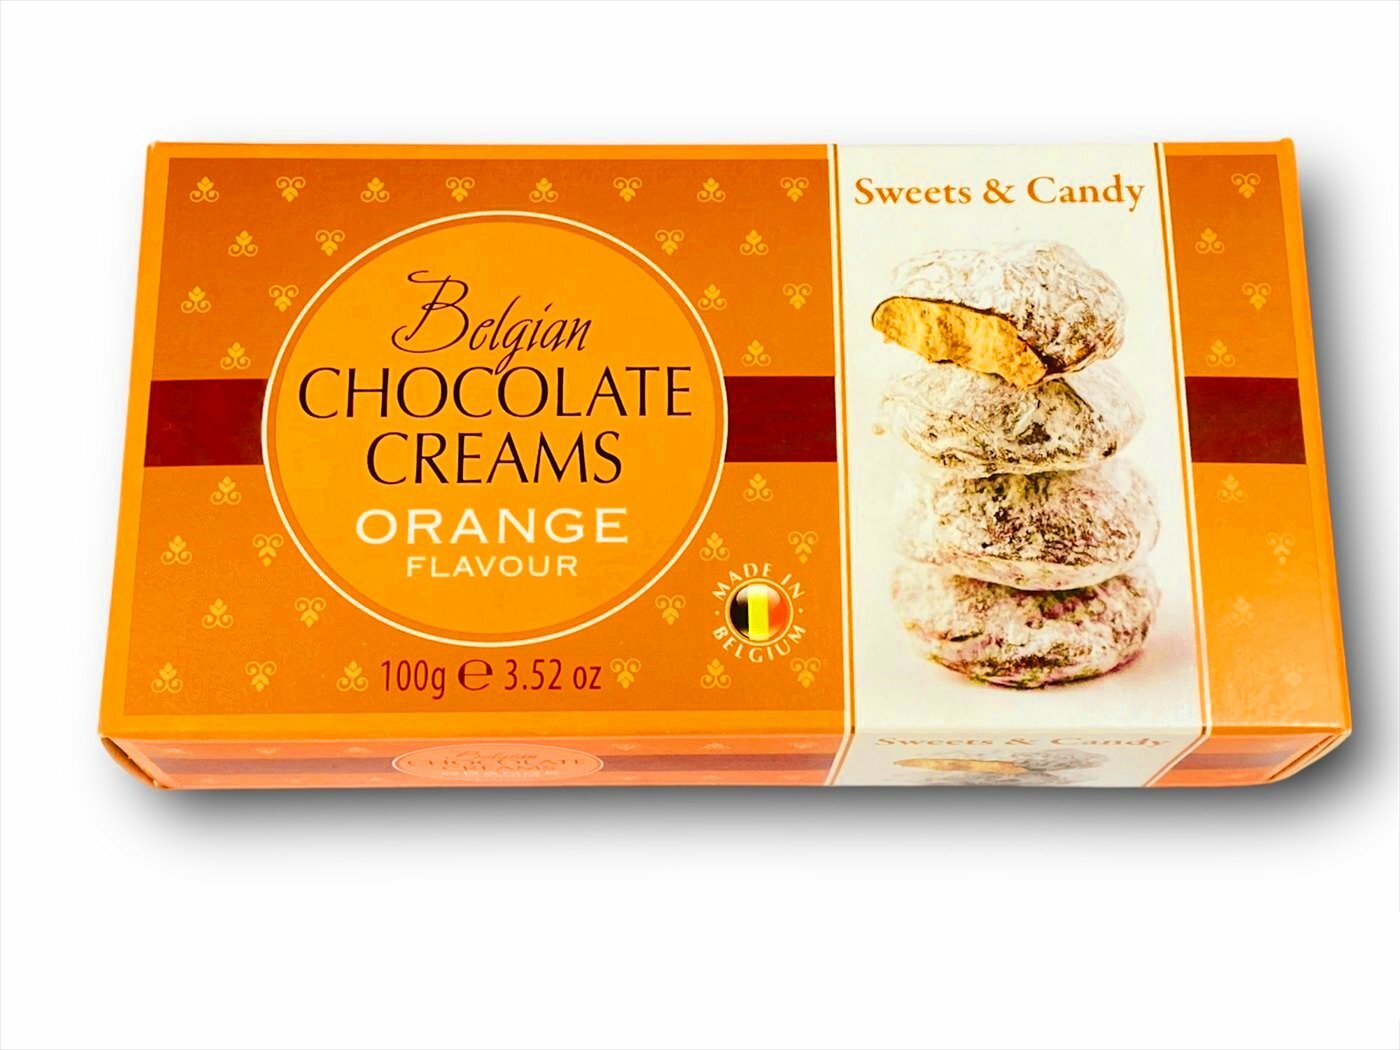 Sweets & Candy Belgian Chocolate Creams Orange Flavour